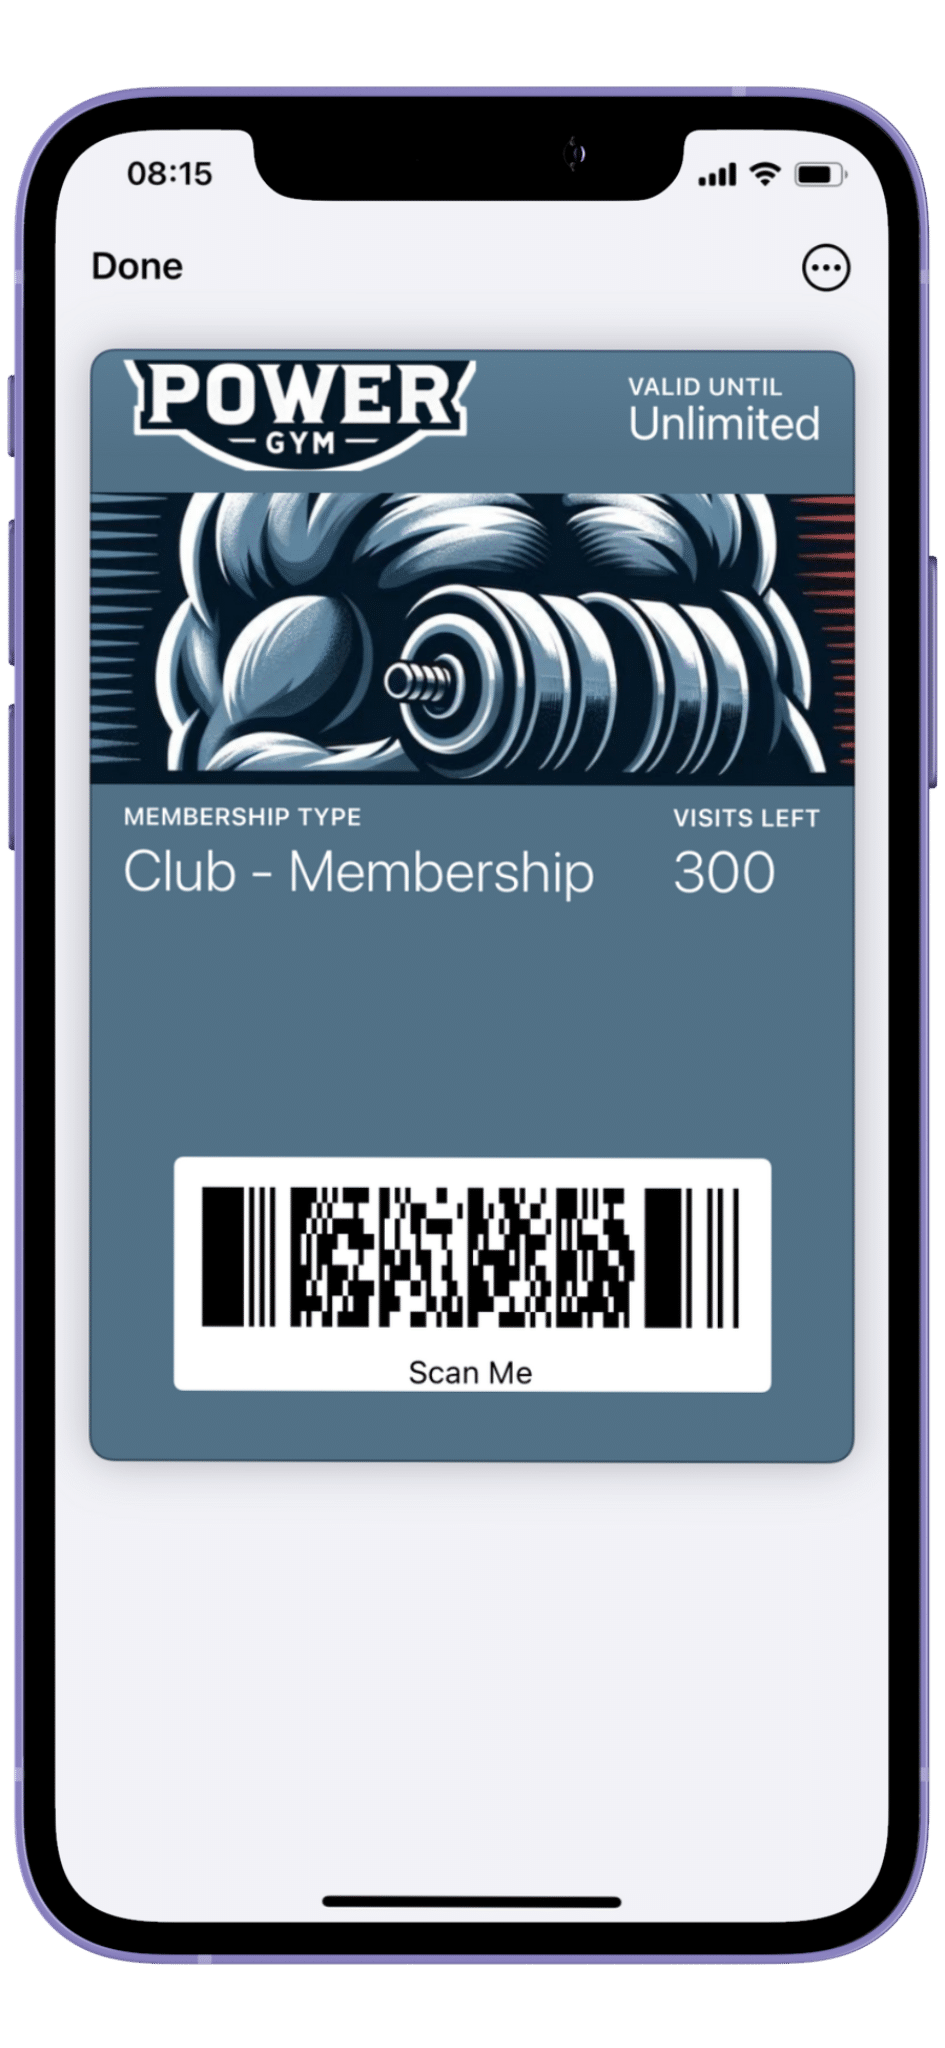 Digital loyalty card displayed on a smartphone screen, indicating a "club - membership" type with 300 visits left.